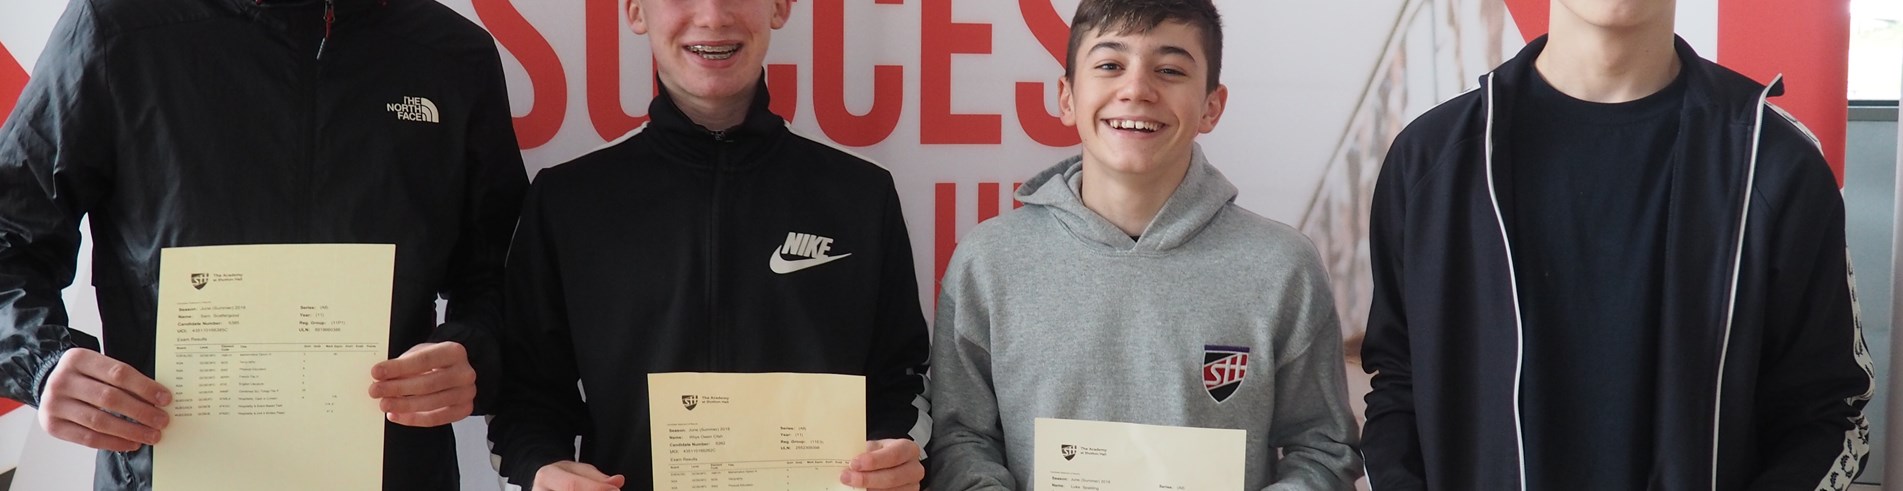 GCSE Results Day 2018